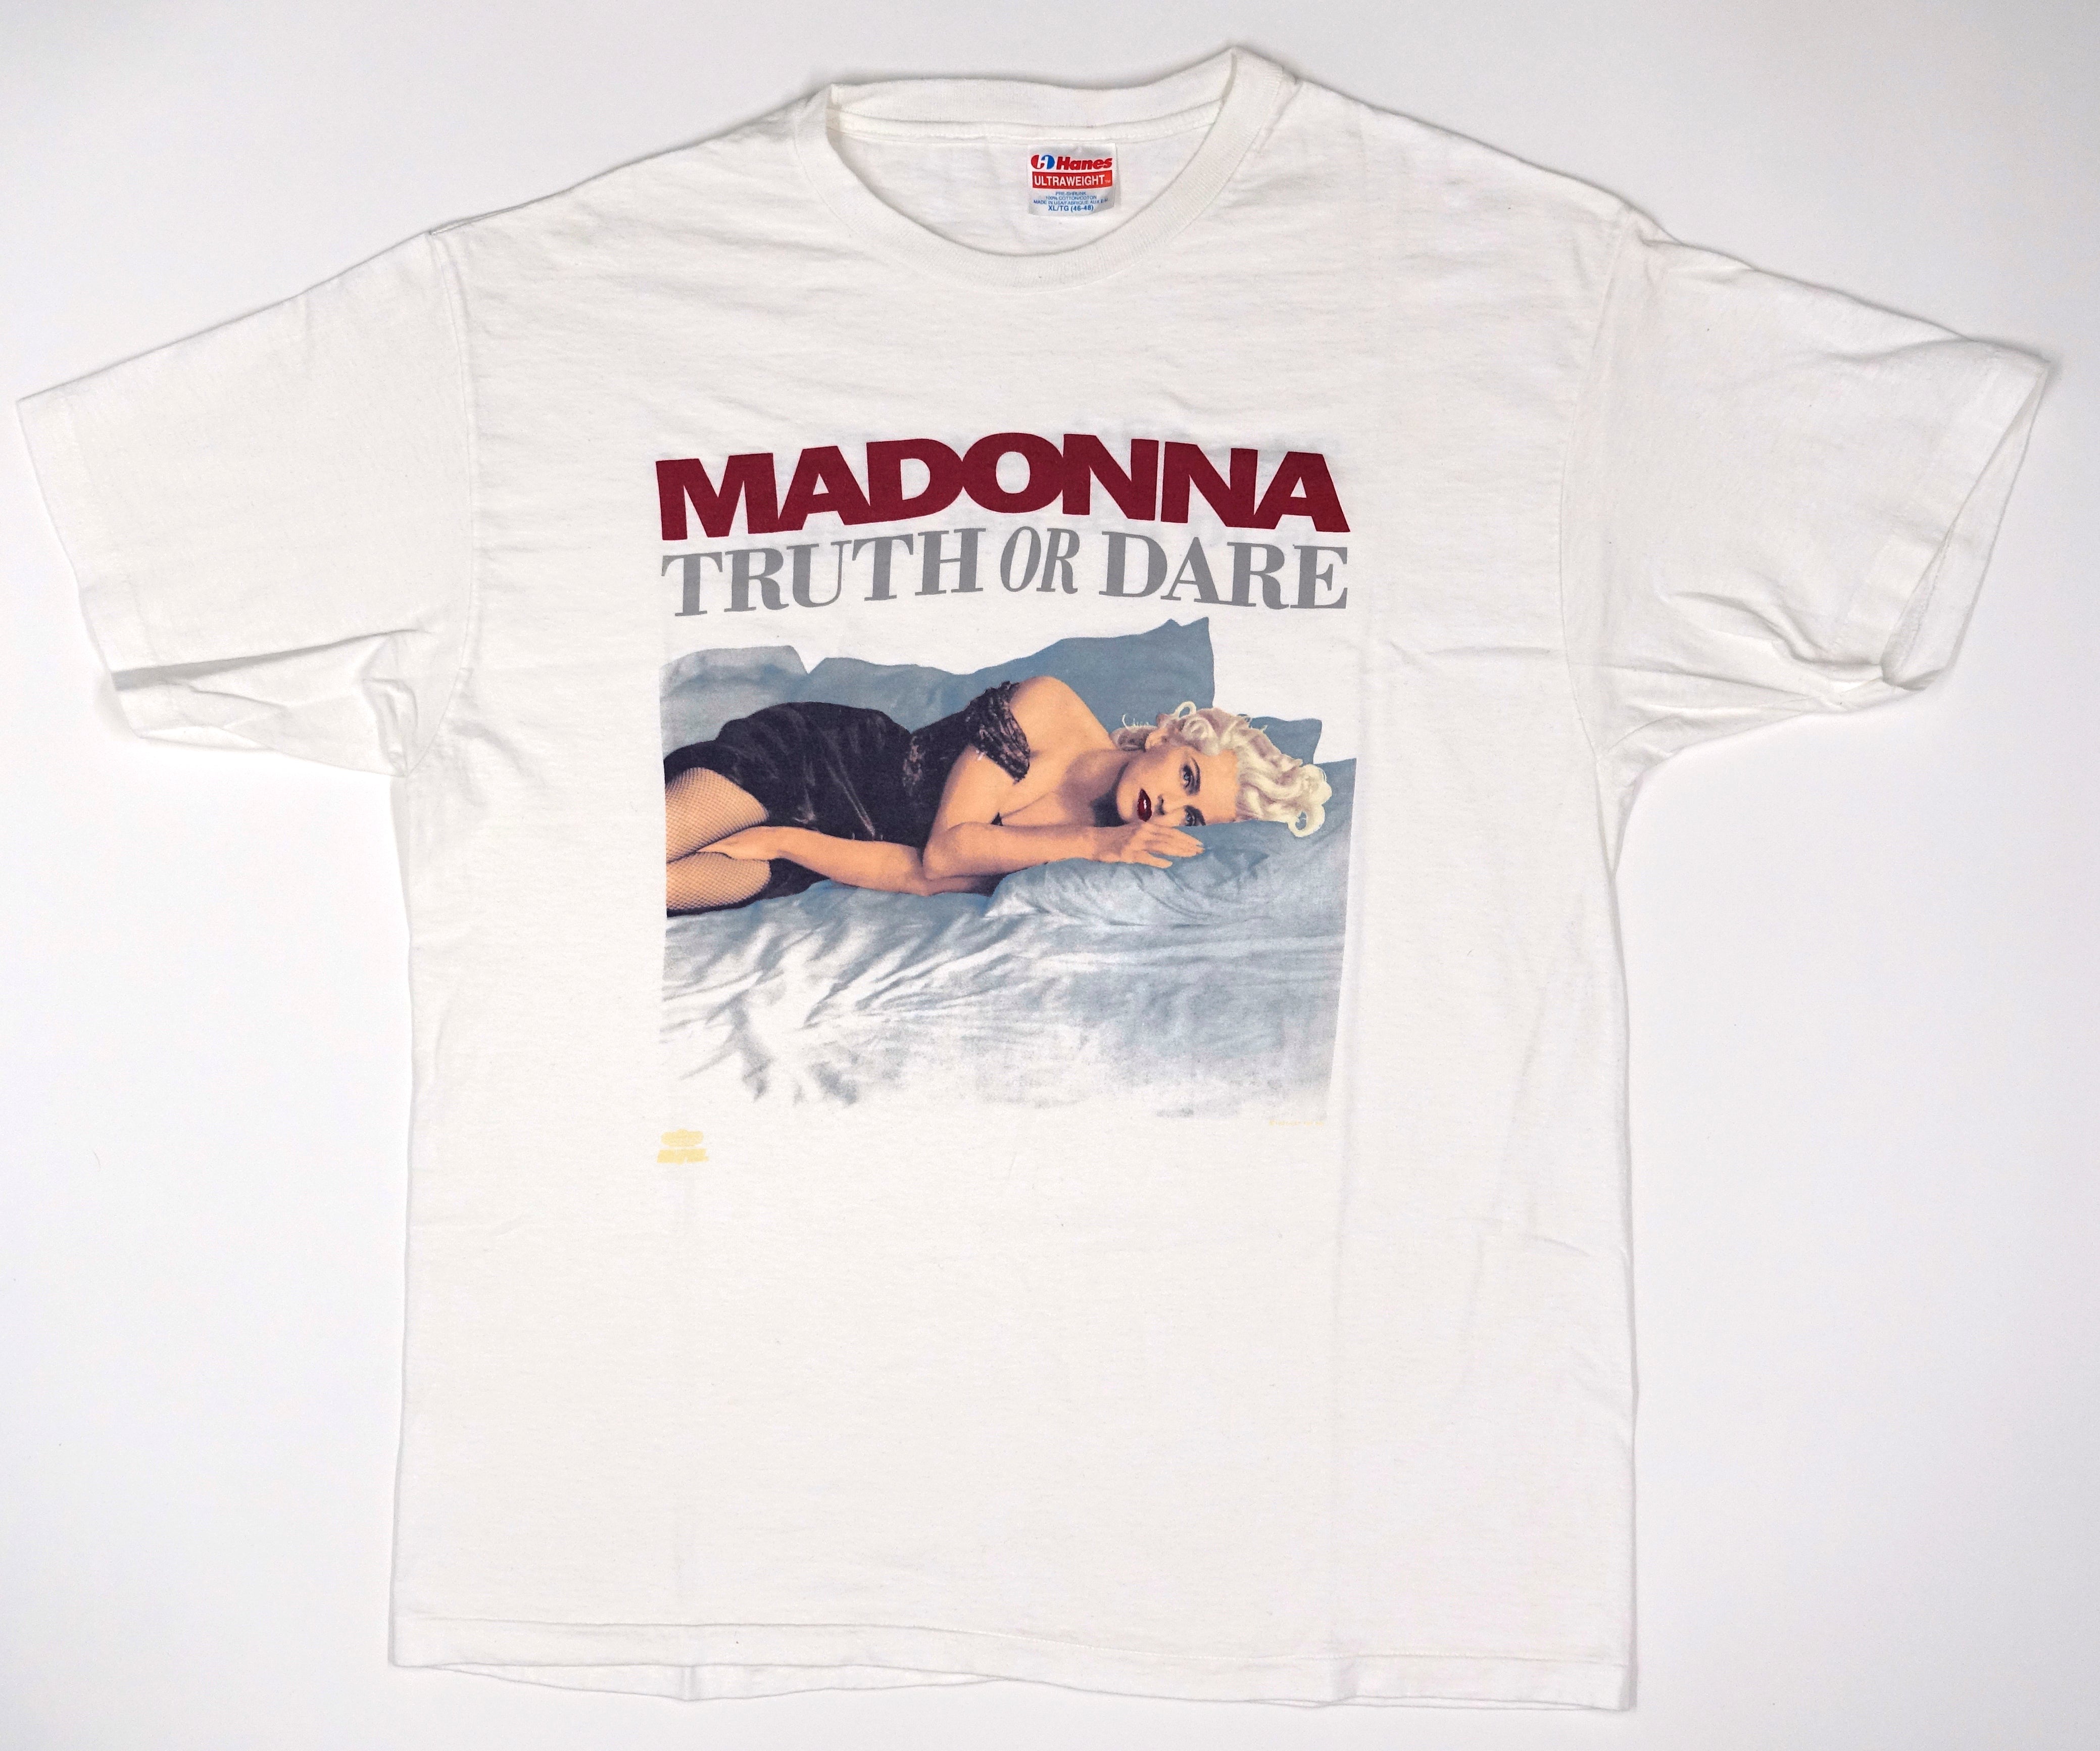 Madonna ‎– Truth Or Dare 1991 (Hanes Ultraweight) Tour Shirt Size XL